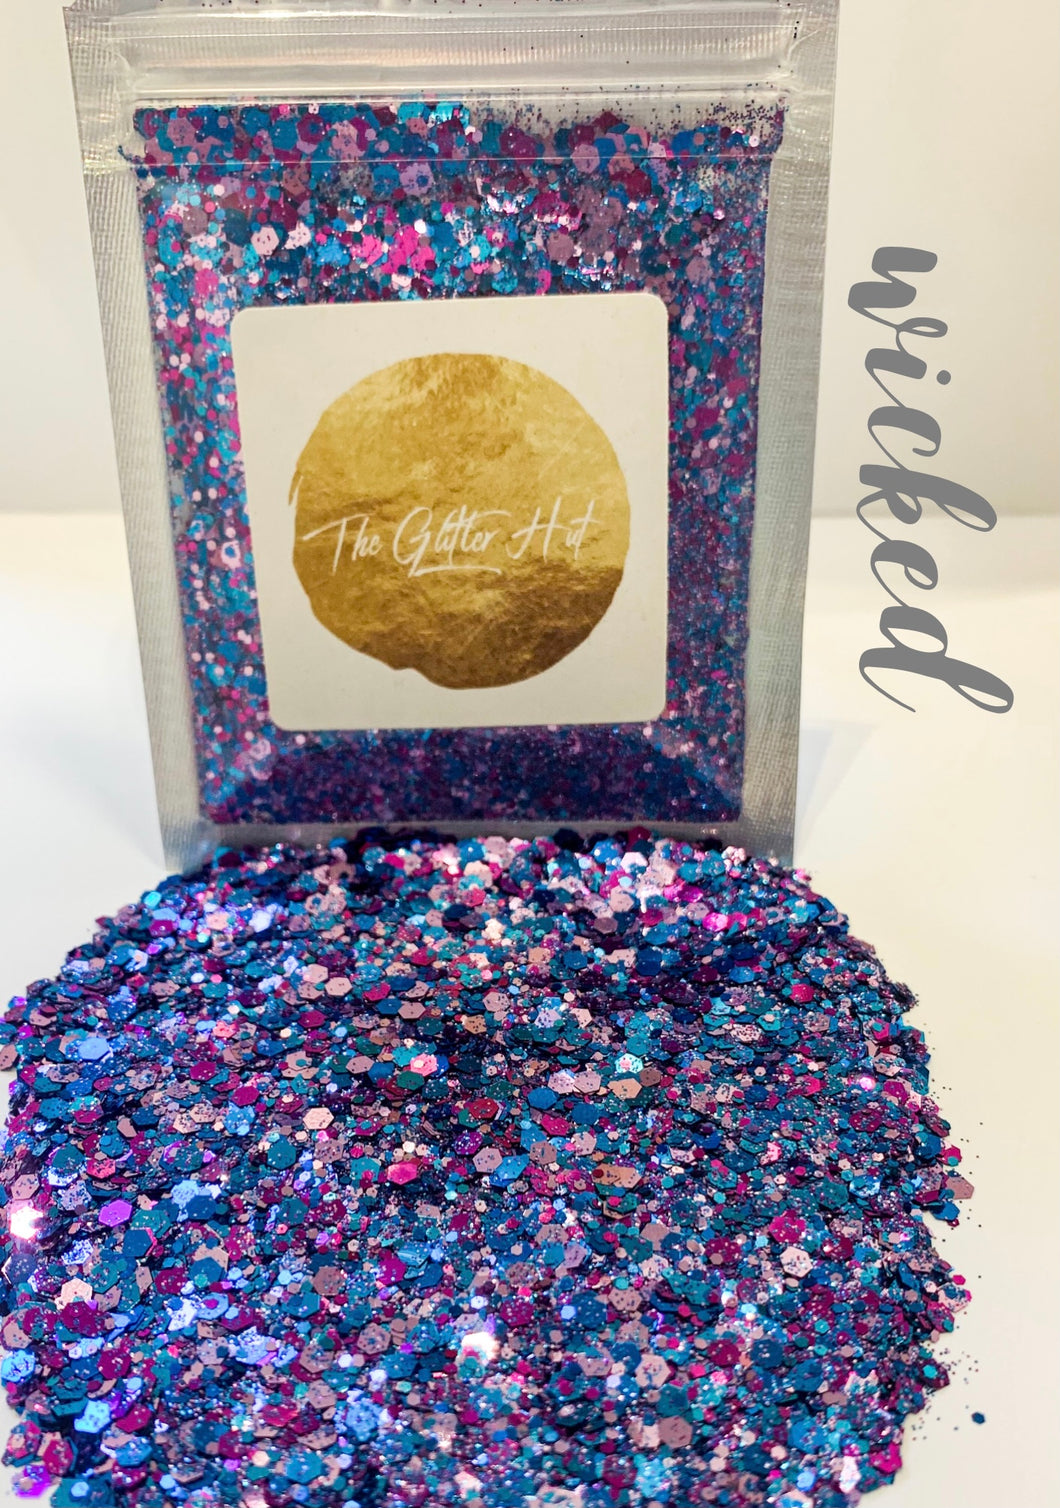 Chunky Fine Mixed 10g Glitter Bag - Wicked